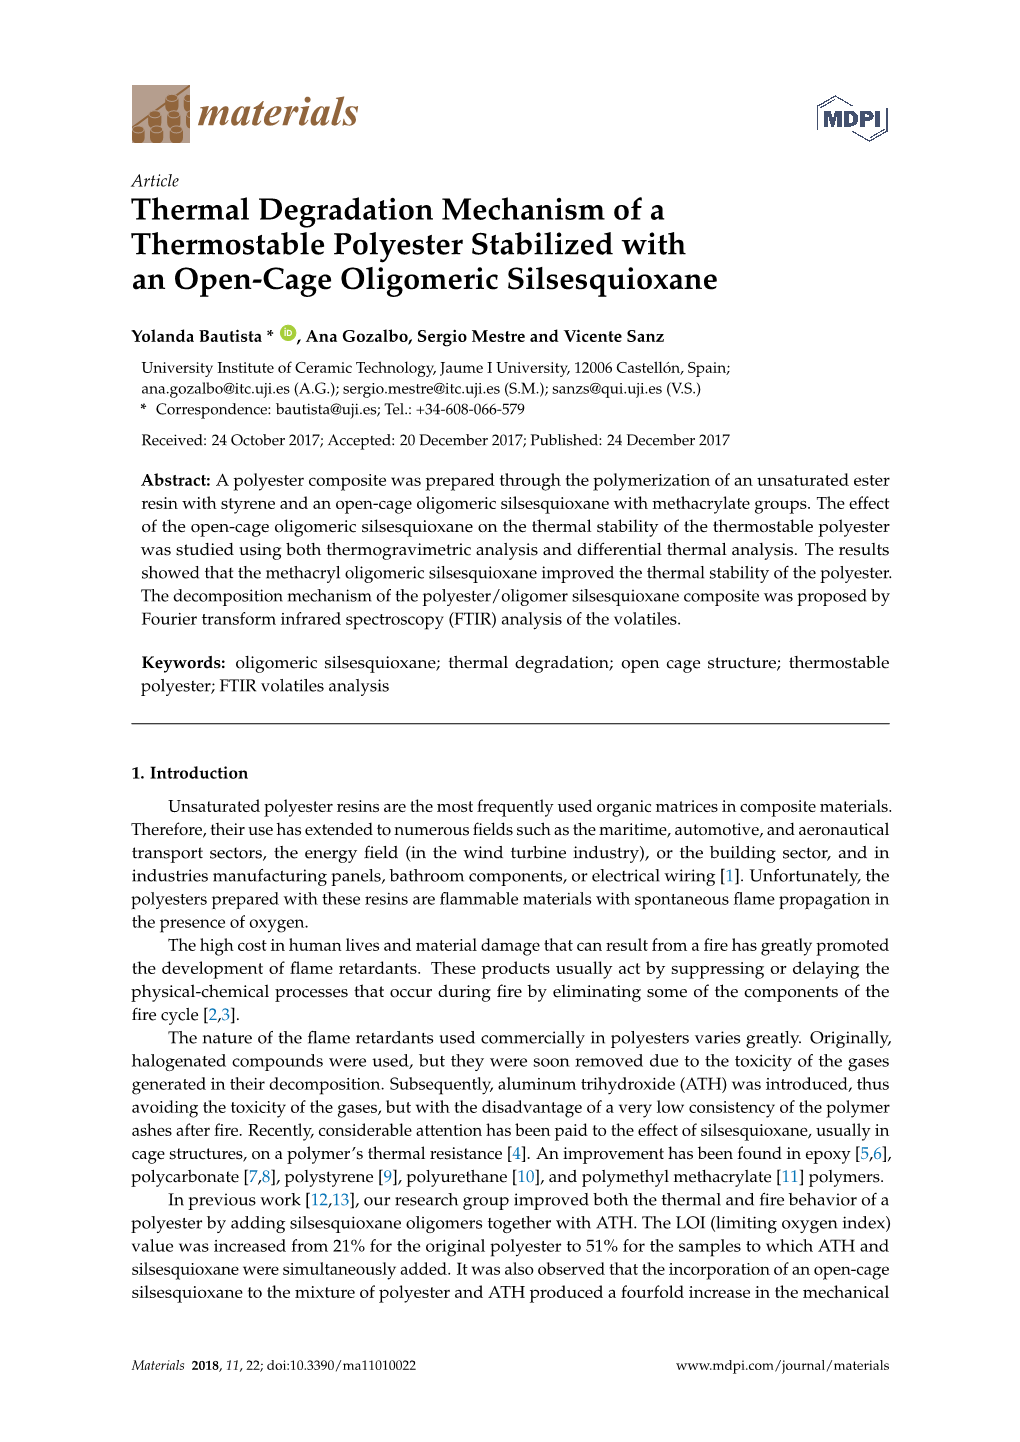 Thermal Degradation Mechanism of a Thermostable Polyester Stabilized with an Open-Cage Oligomeric Silsesquioxane